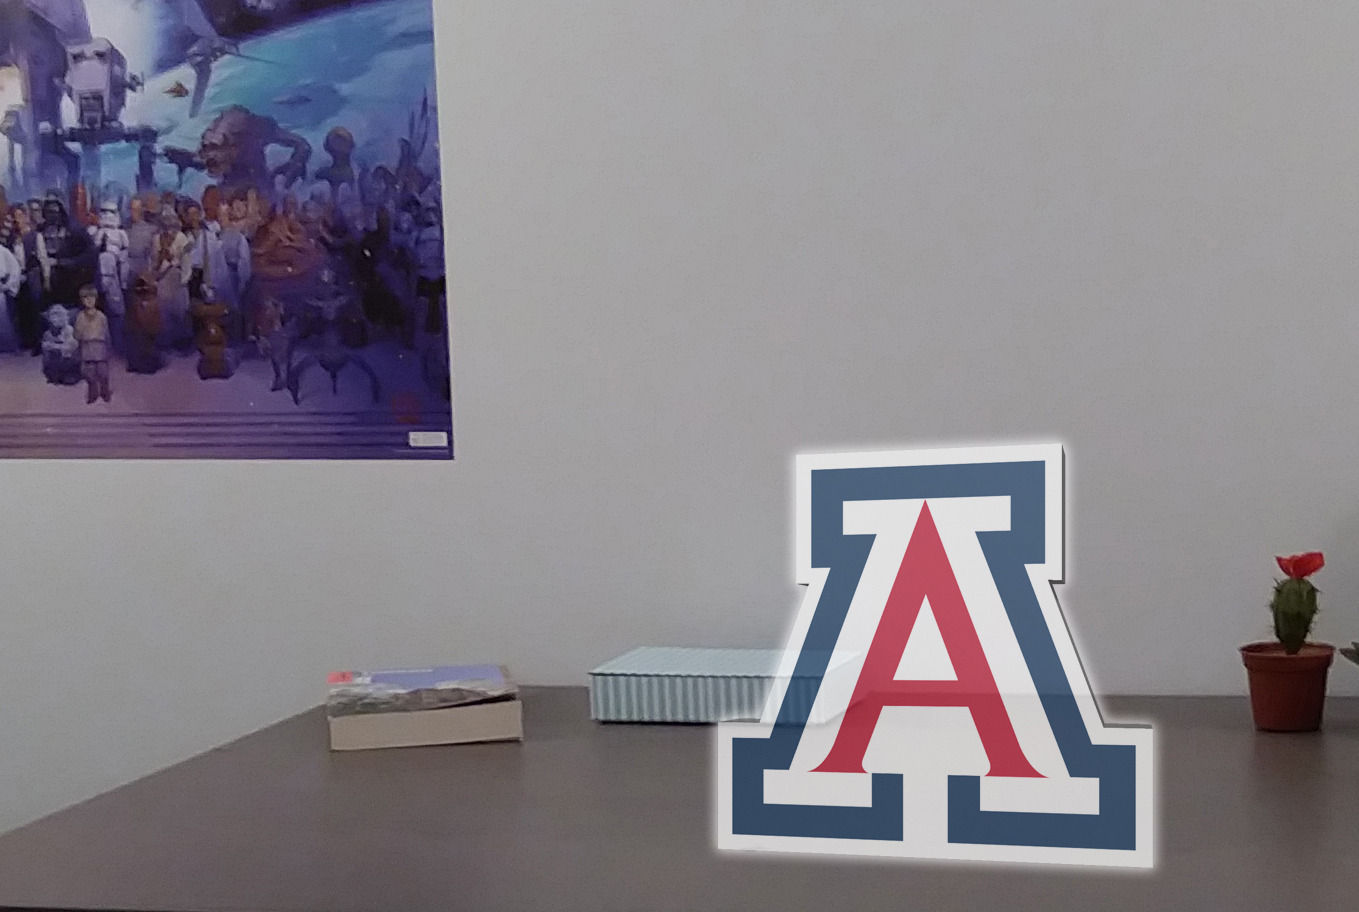 Image showing room with augmented reality "A" logo appearing on desk